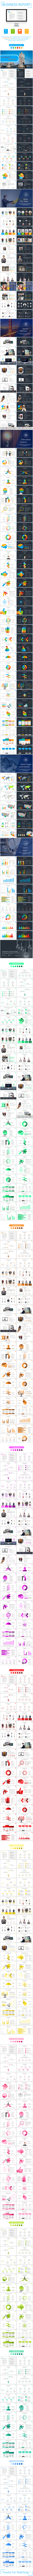 Business Report Powerpoint Templates